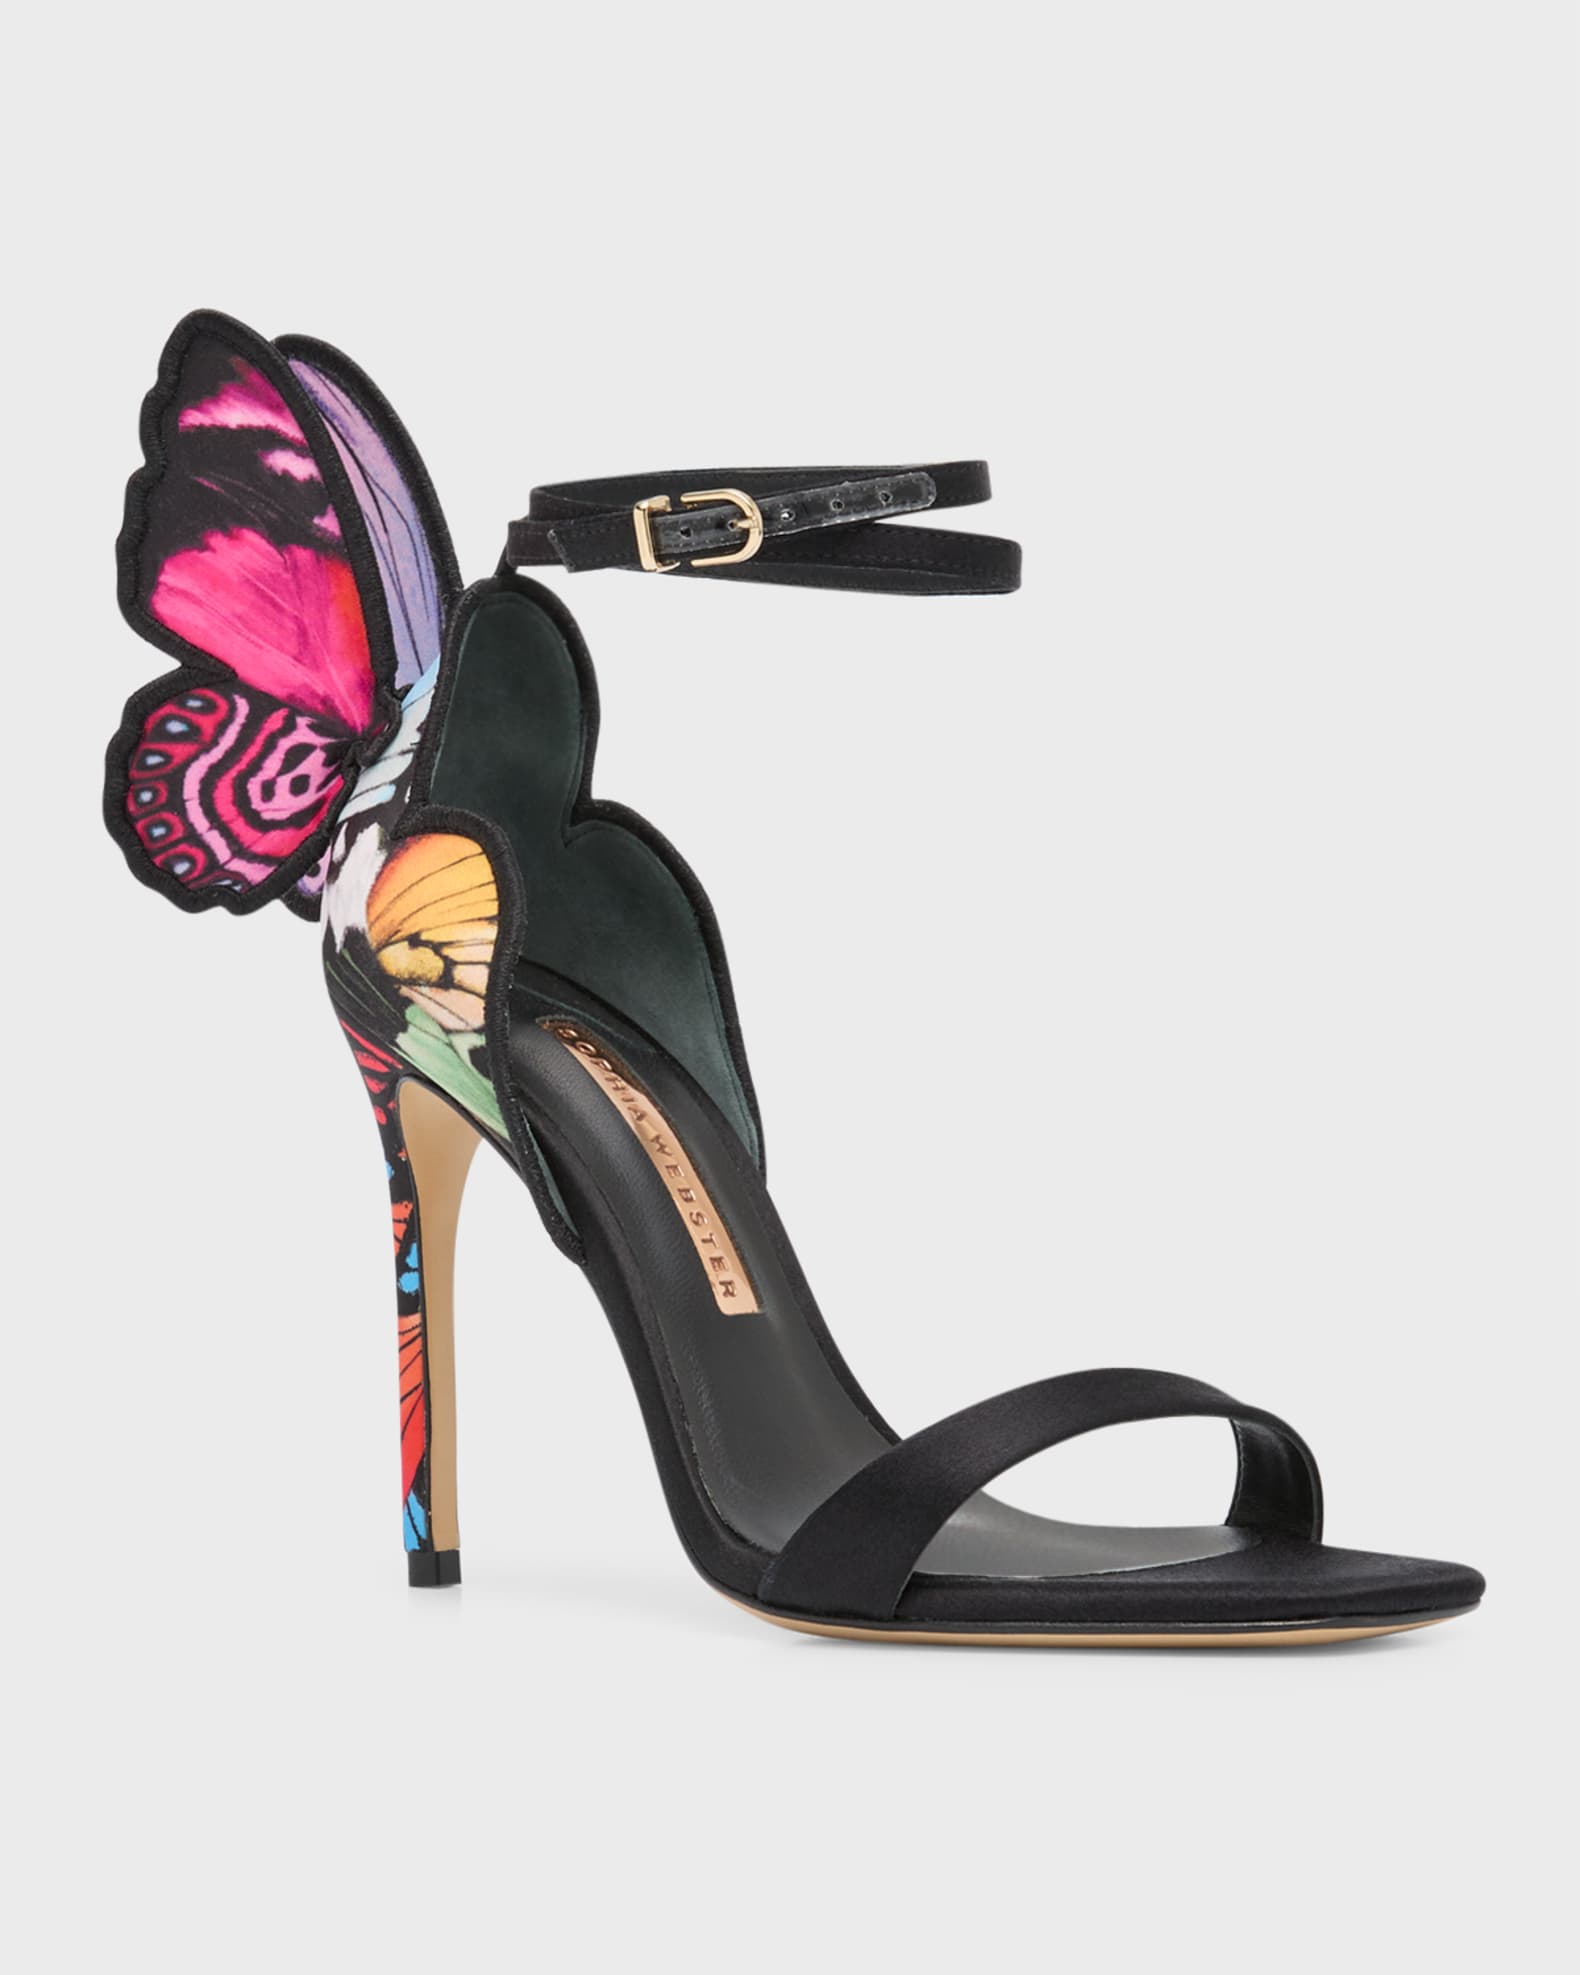 Sophia Webster Chiara Butterfly Embroidered Stiletto Sandals | Neiman ...